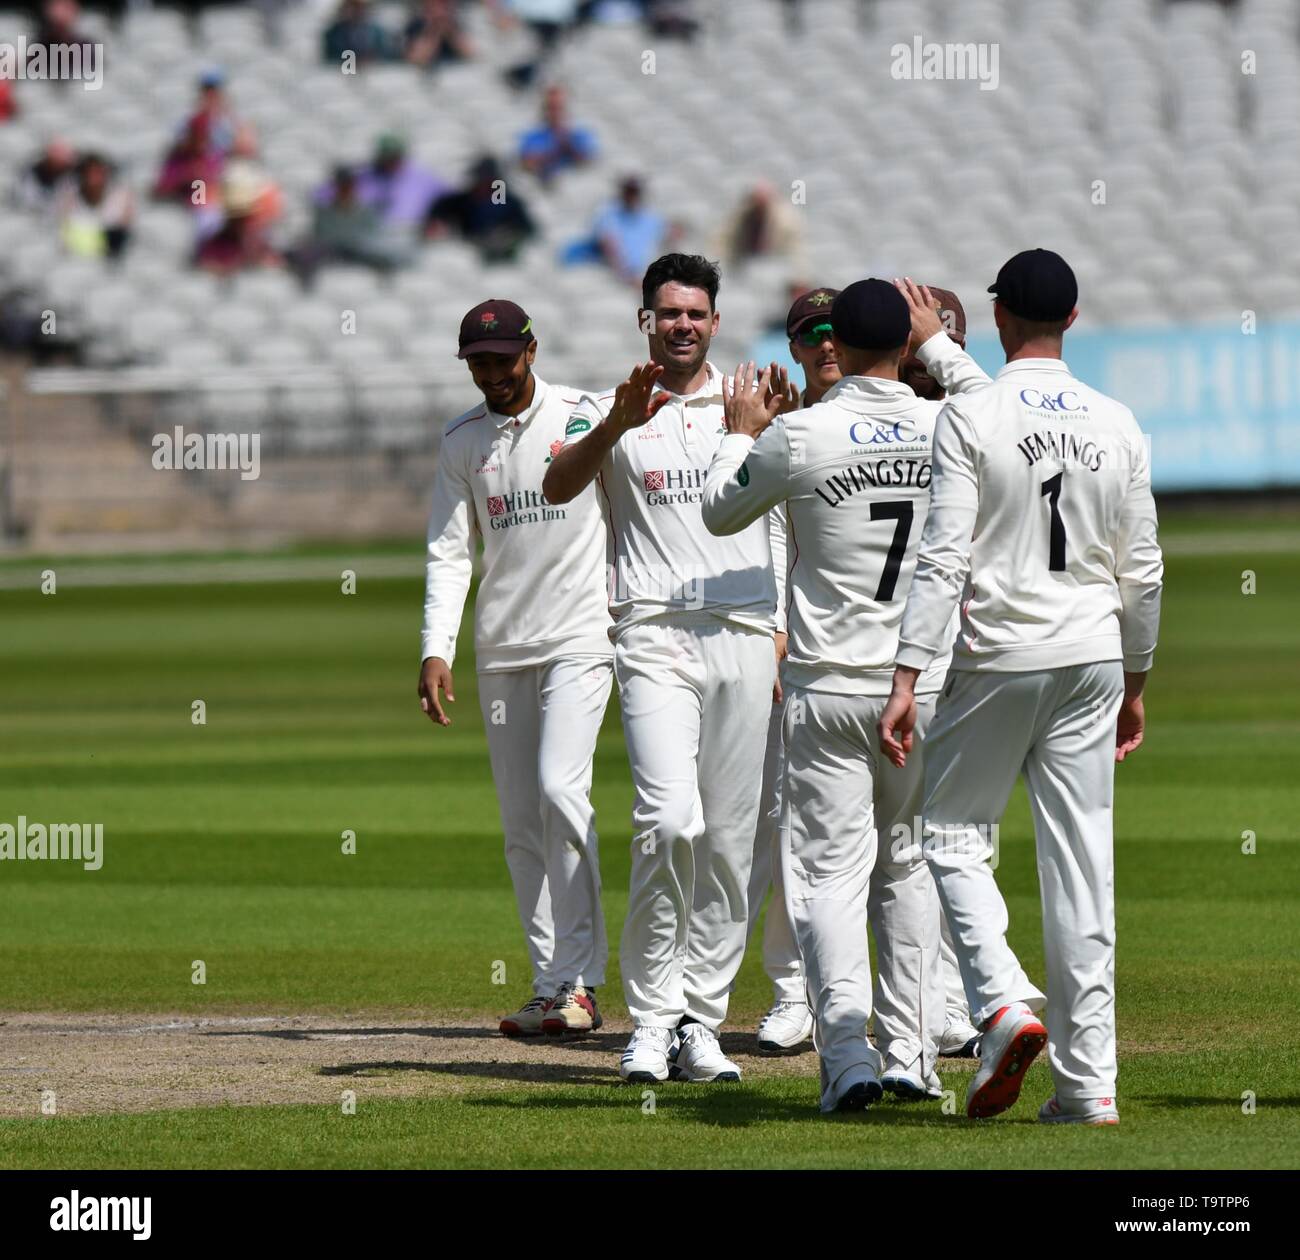 County Cricket. Lancashire v Worcestershire  Emirates Old Trafford  20th May 2019  James Anderson (Lancashire) receives congratulations for taking the wicket of Ed Barnnard (Worcestershire) caught by Liam Livingstone. Stock Photo